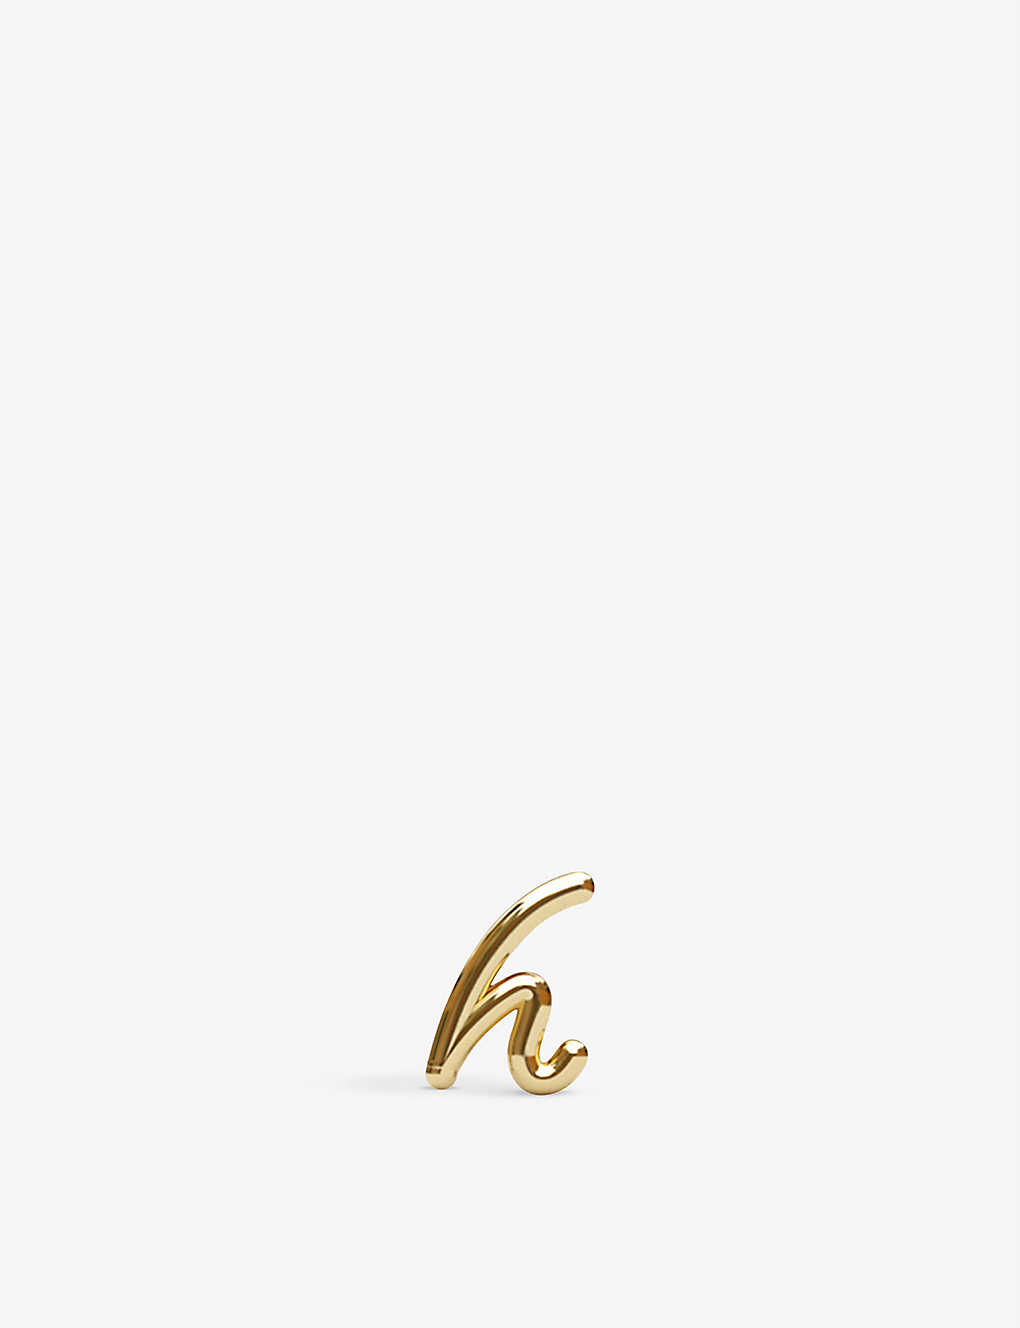 Shop The Alkemistry Women's 18ct Yellow Gold Love Letter H Initial 18ct Yellow Gold Single Stud Earring